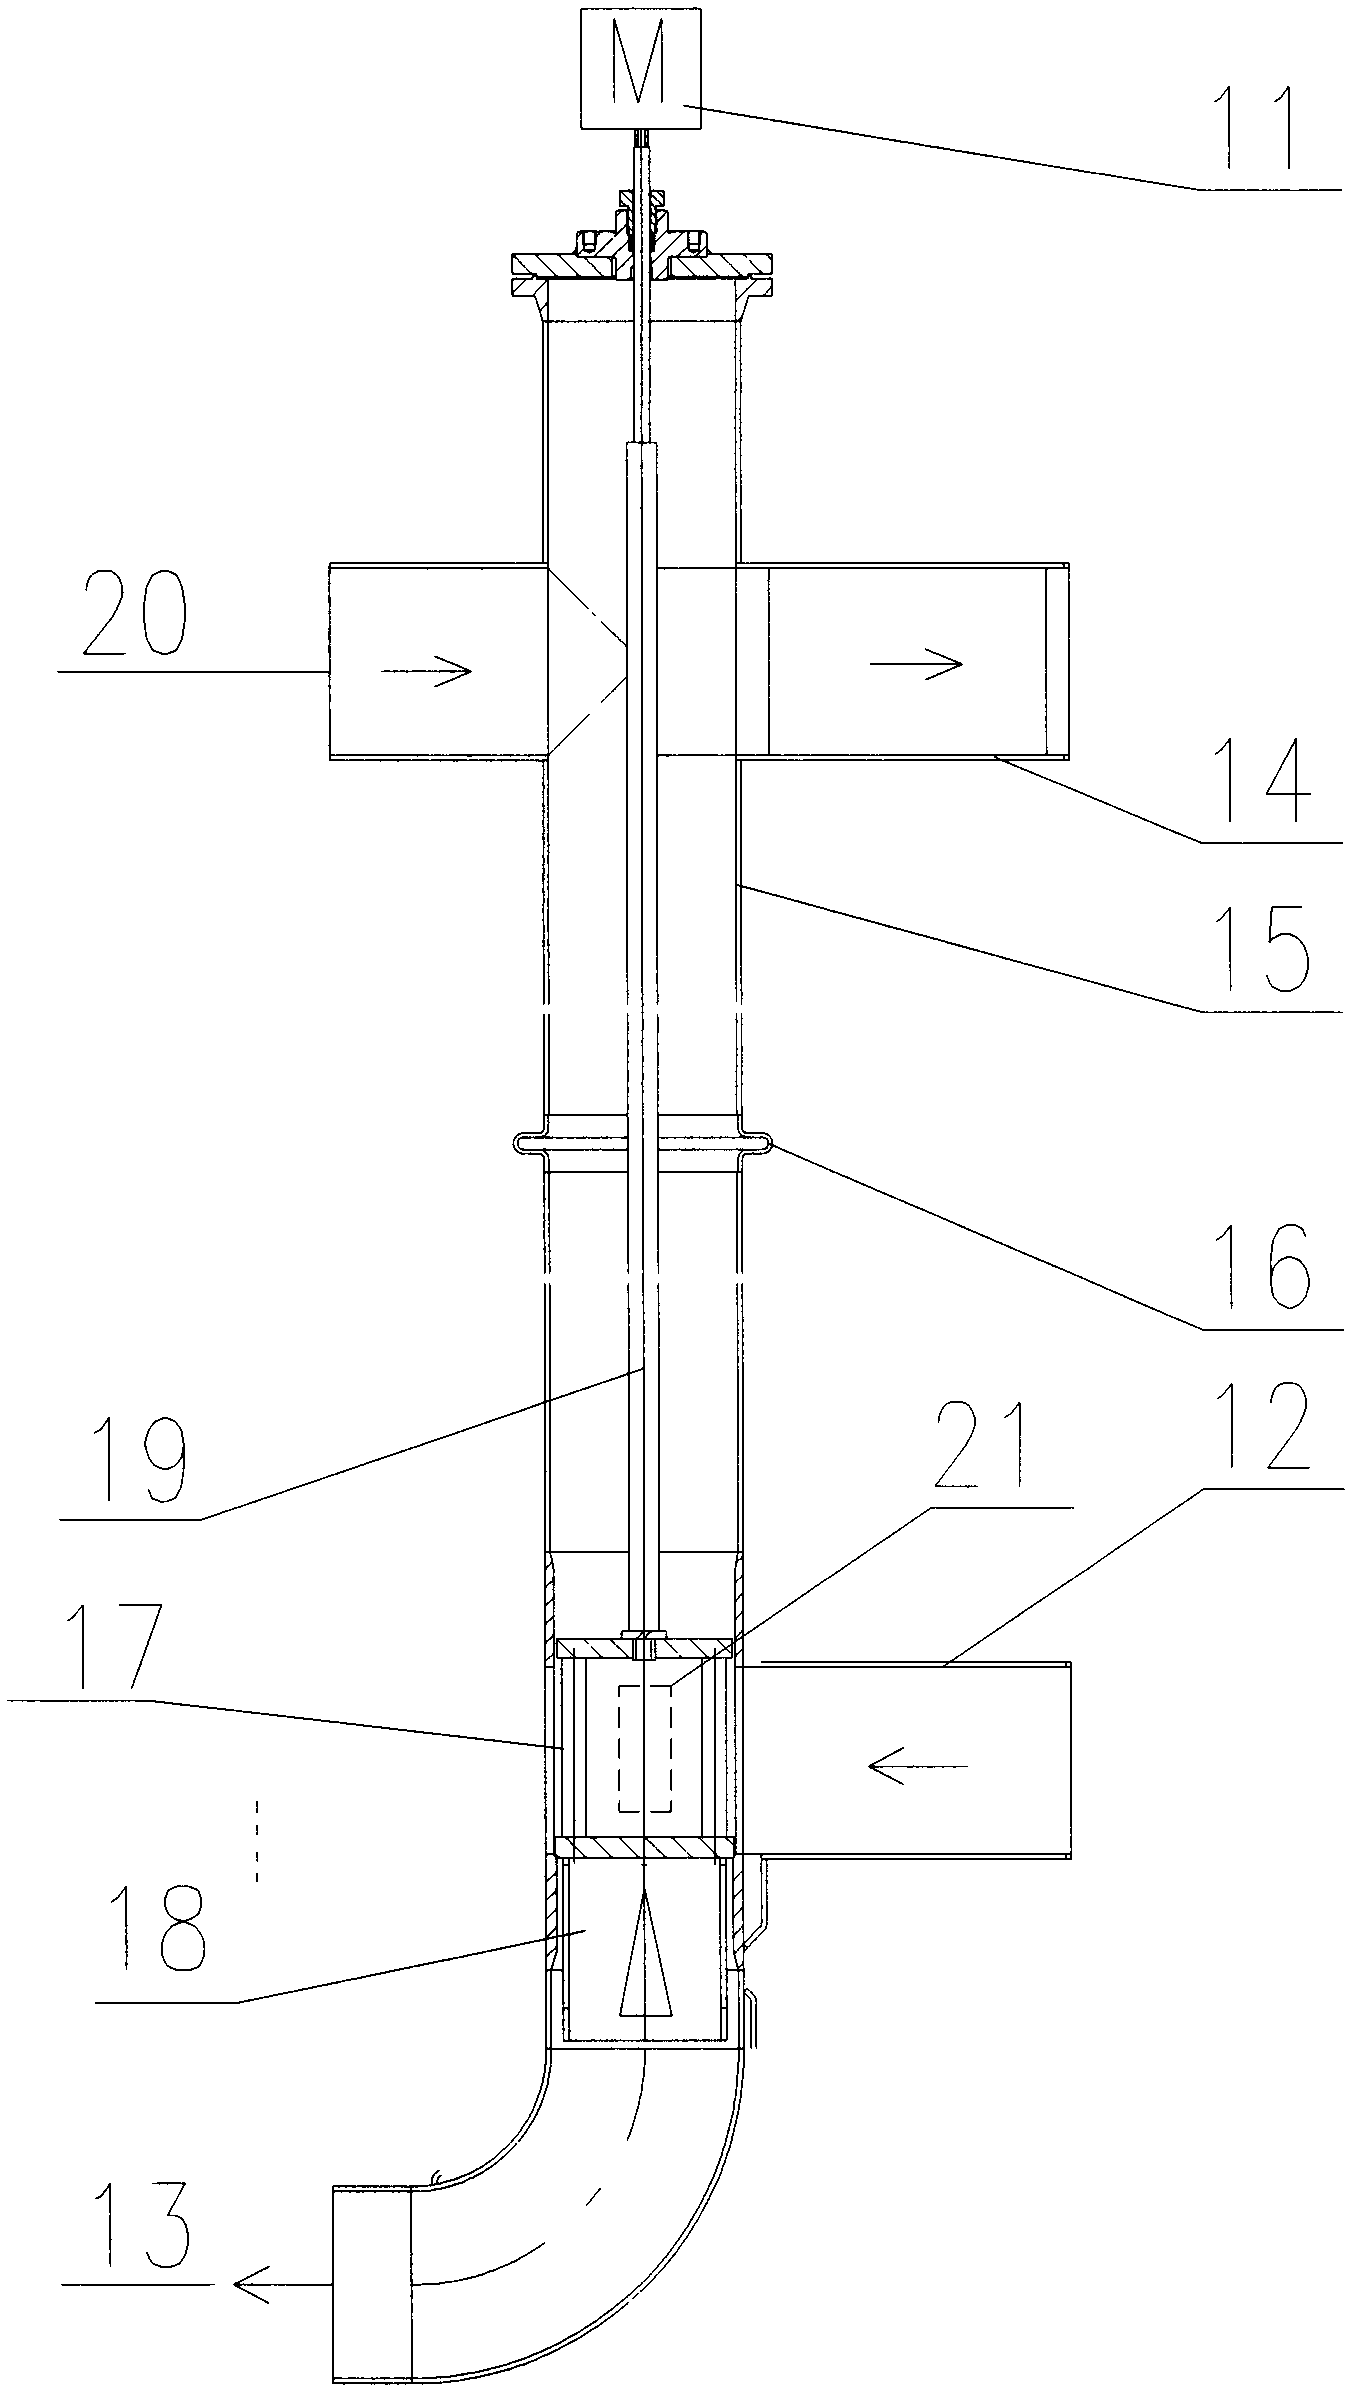 Oxidation reaction temperature regulation control device and method in fixed bed maleic anhydride production with normal butane method